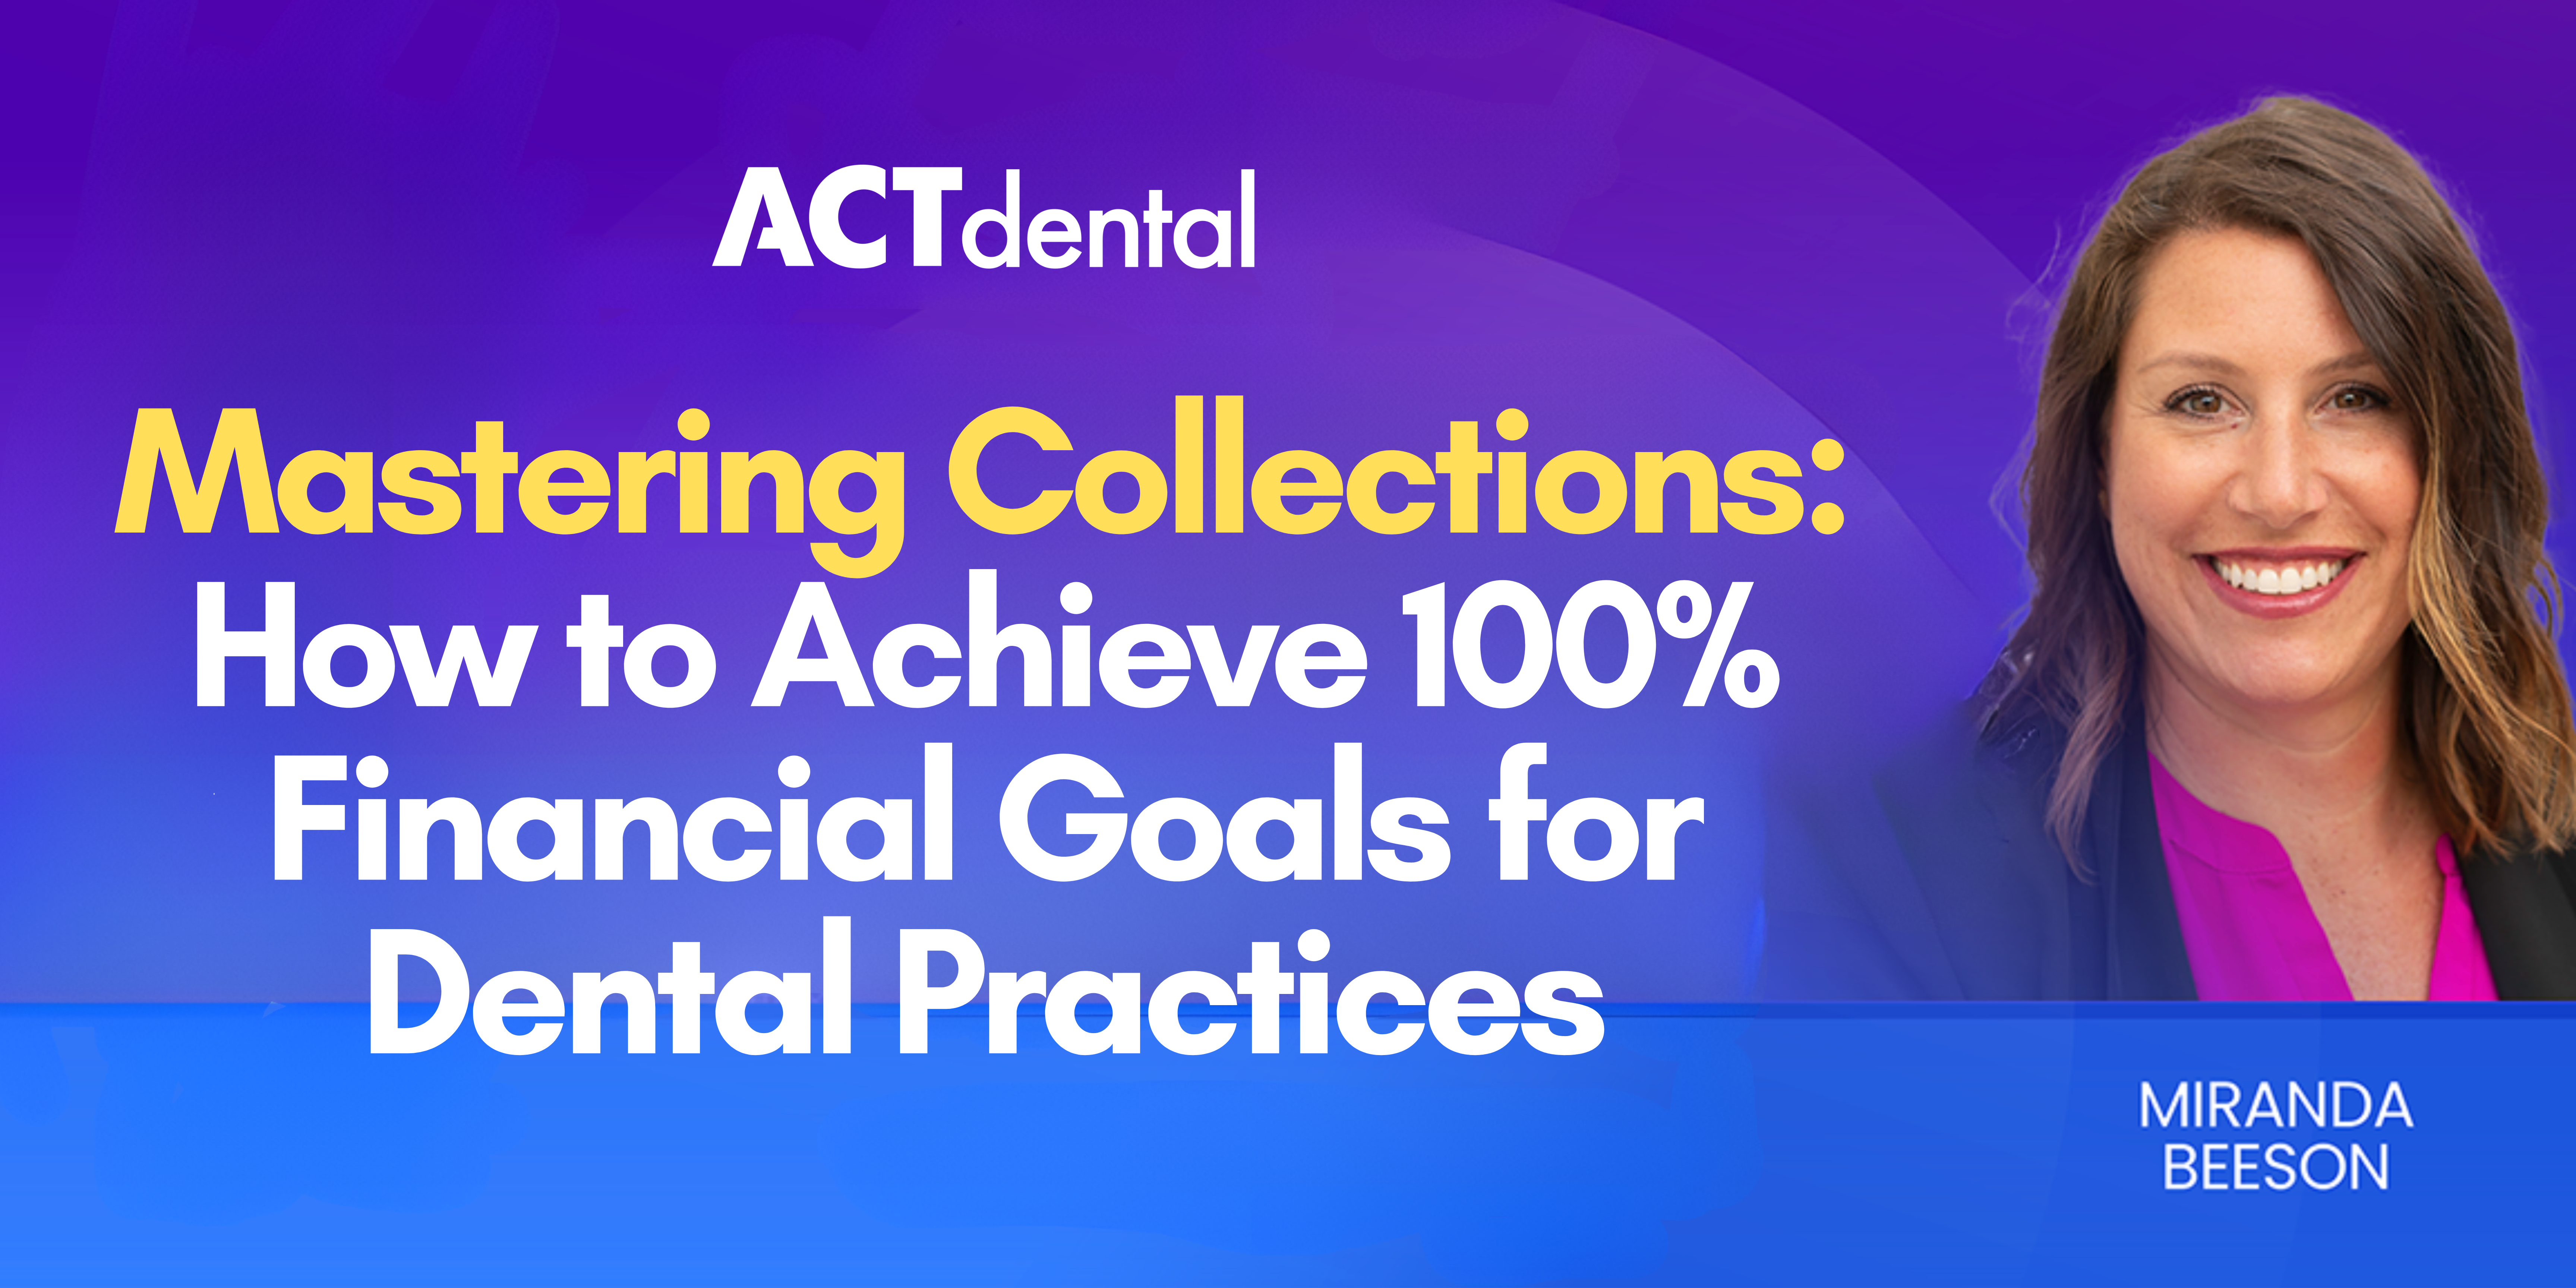 Mastering Collections: How to Achieve 100% Financial Goals for Dental Practices